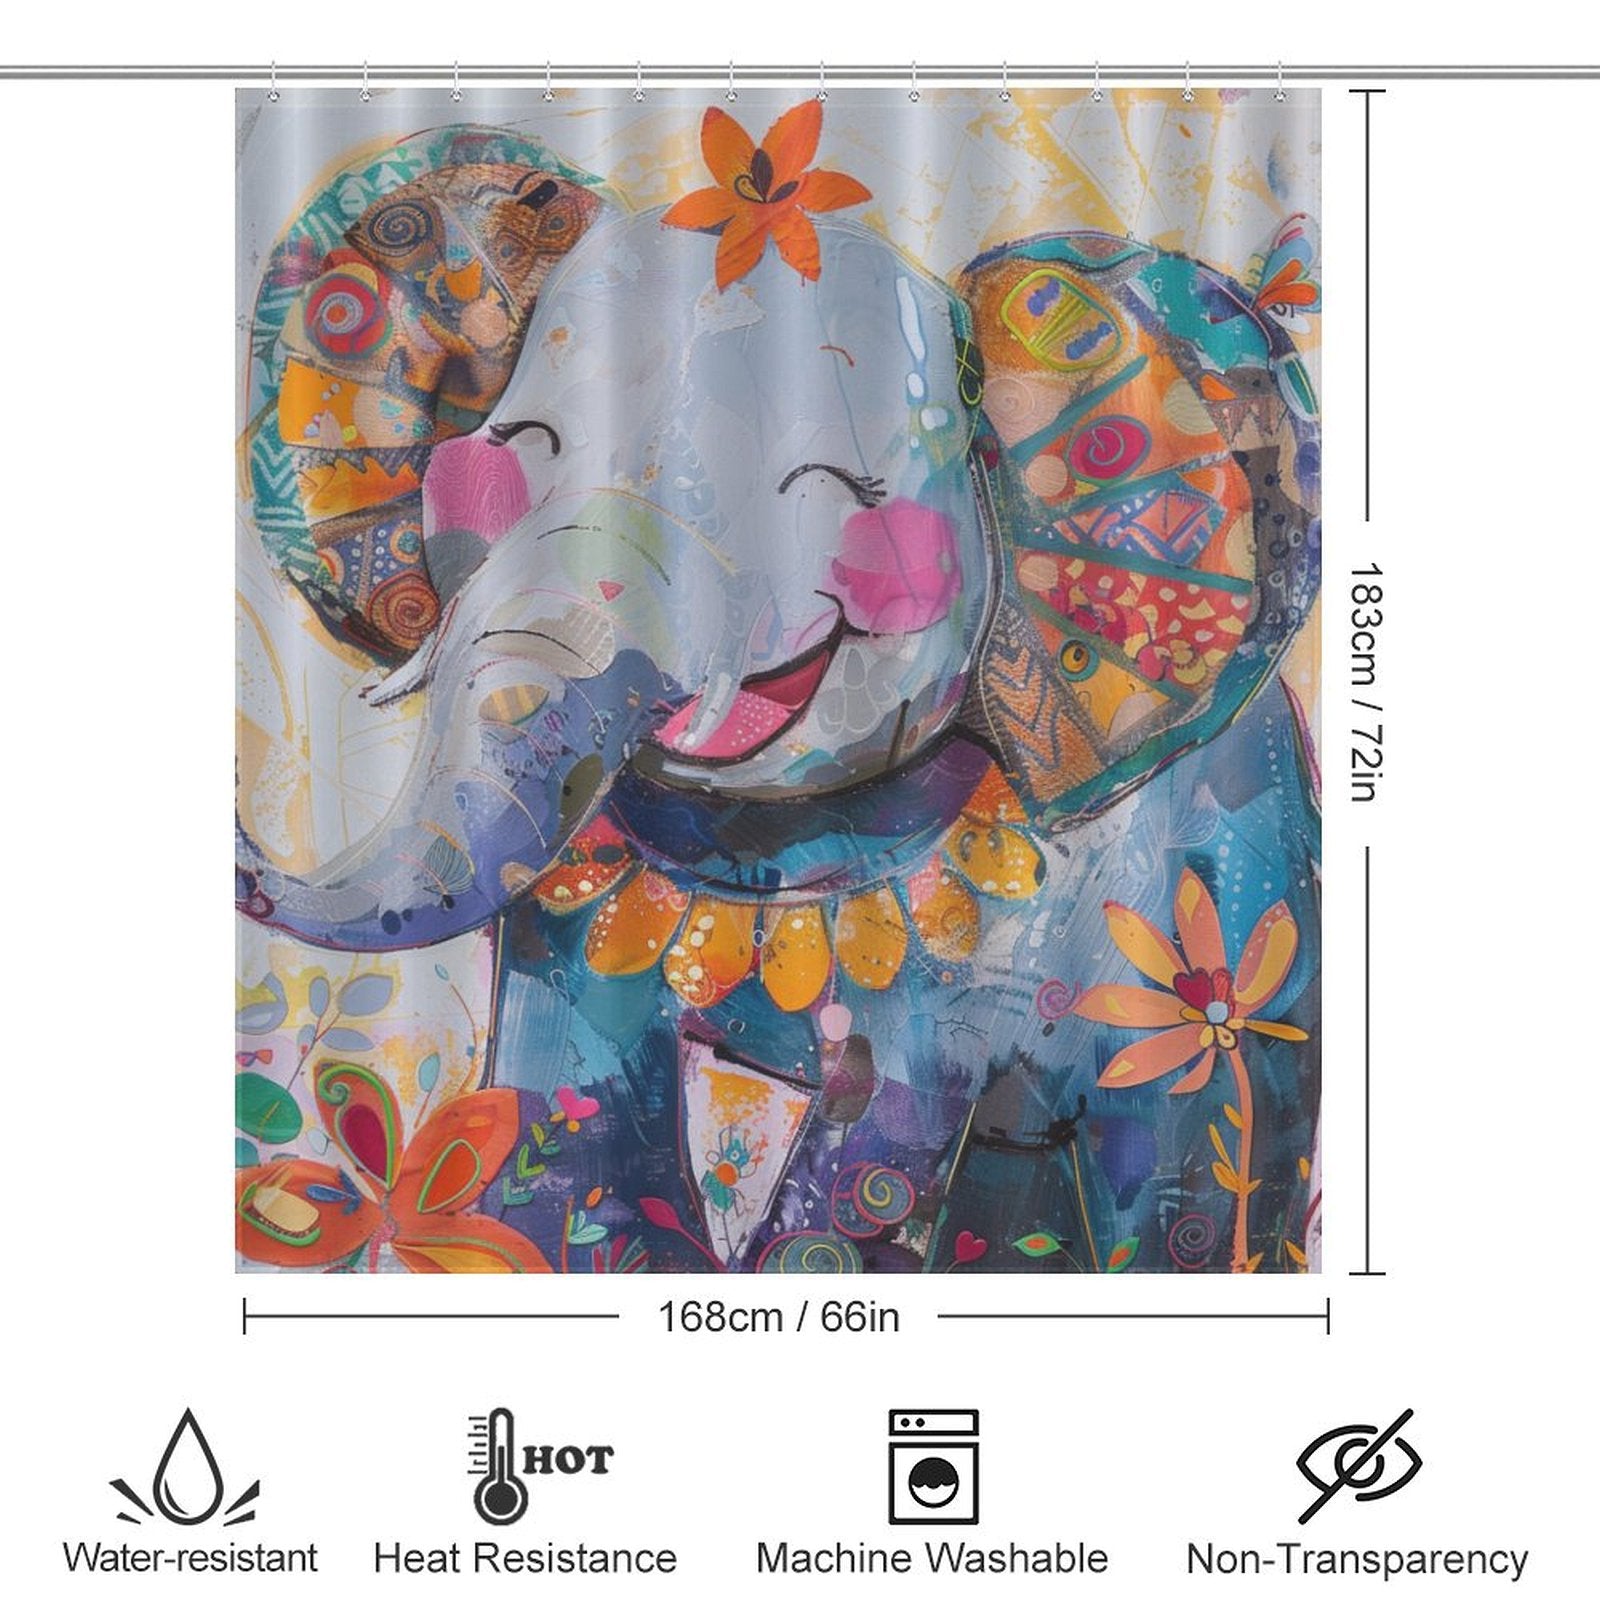 The Cute Baby Happy Elephant and Flowers Shower Curtain-Cottoncat by Cotton Cat features a smiling, cute baby elephant with intricate patterns and vibrant colors. Perfect for enhancing your bathroom decor. Dimensions: 183 cm x 168 cm (72 in x 66 in). Water-resistant, heat-resistant, machine washable, and non-transparent.